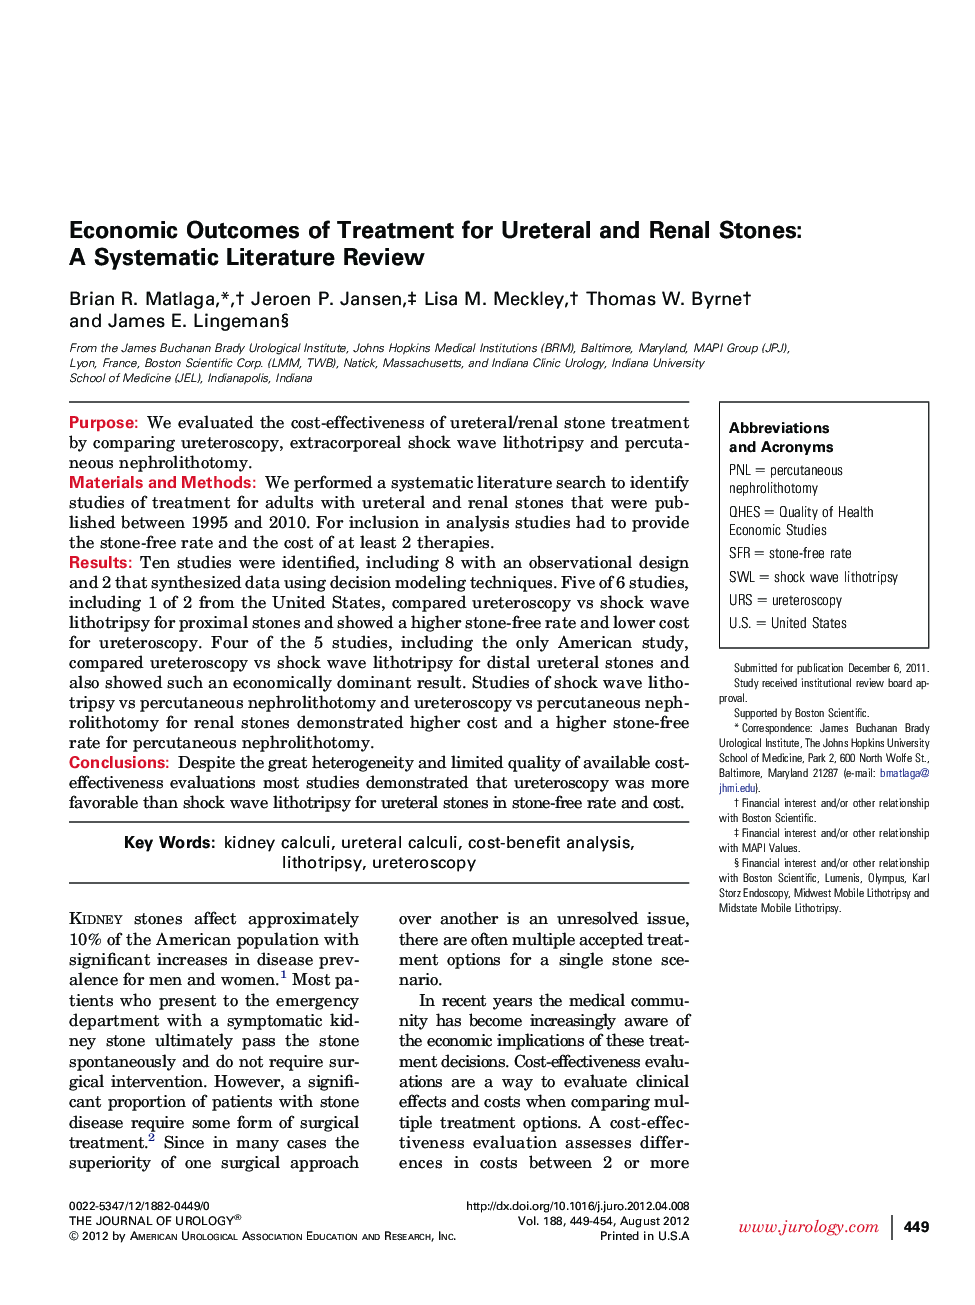 Economic Outcomes of Treatment for Ureteral and Renal Stones: A Systematic Literature Review